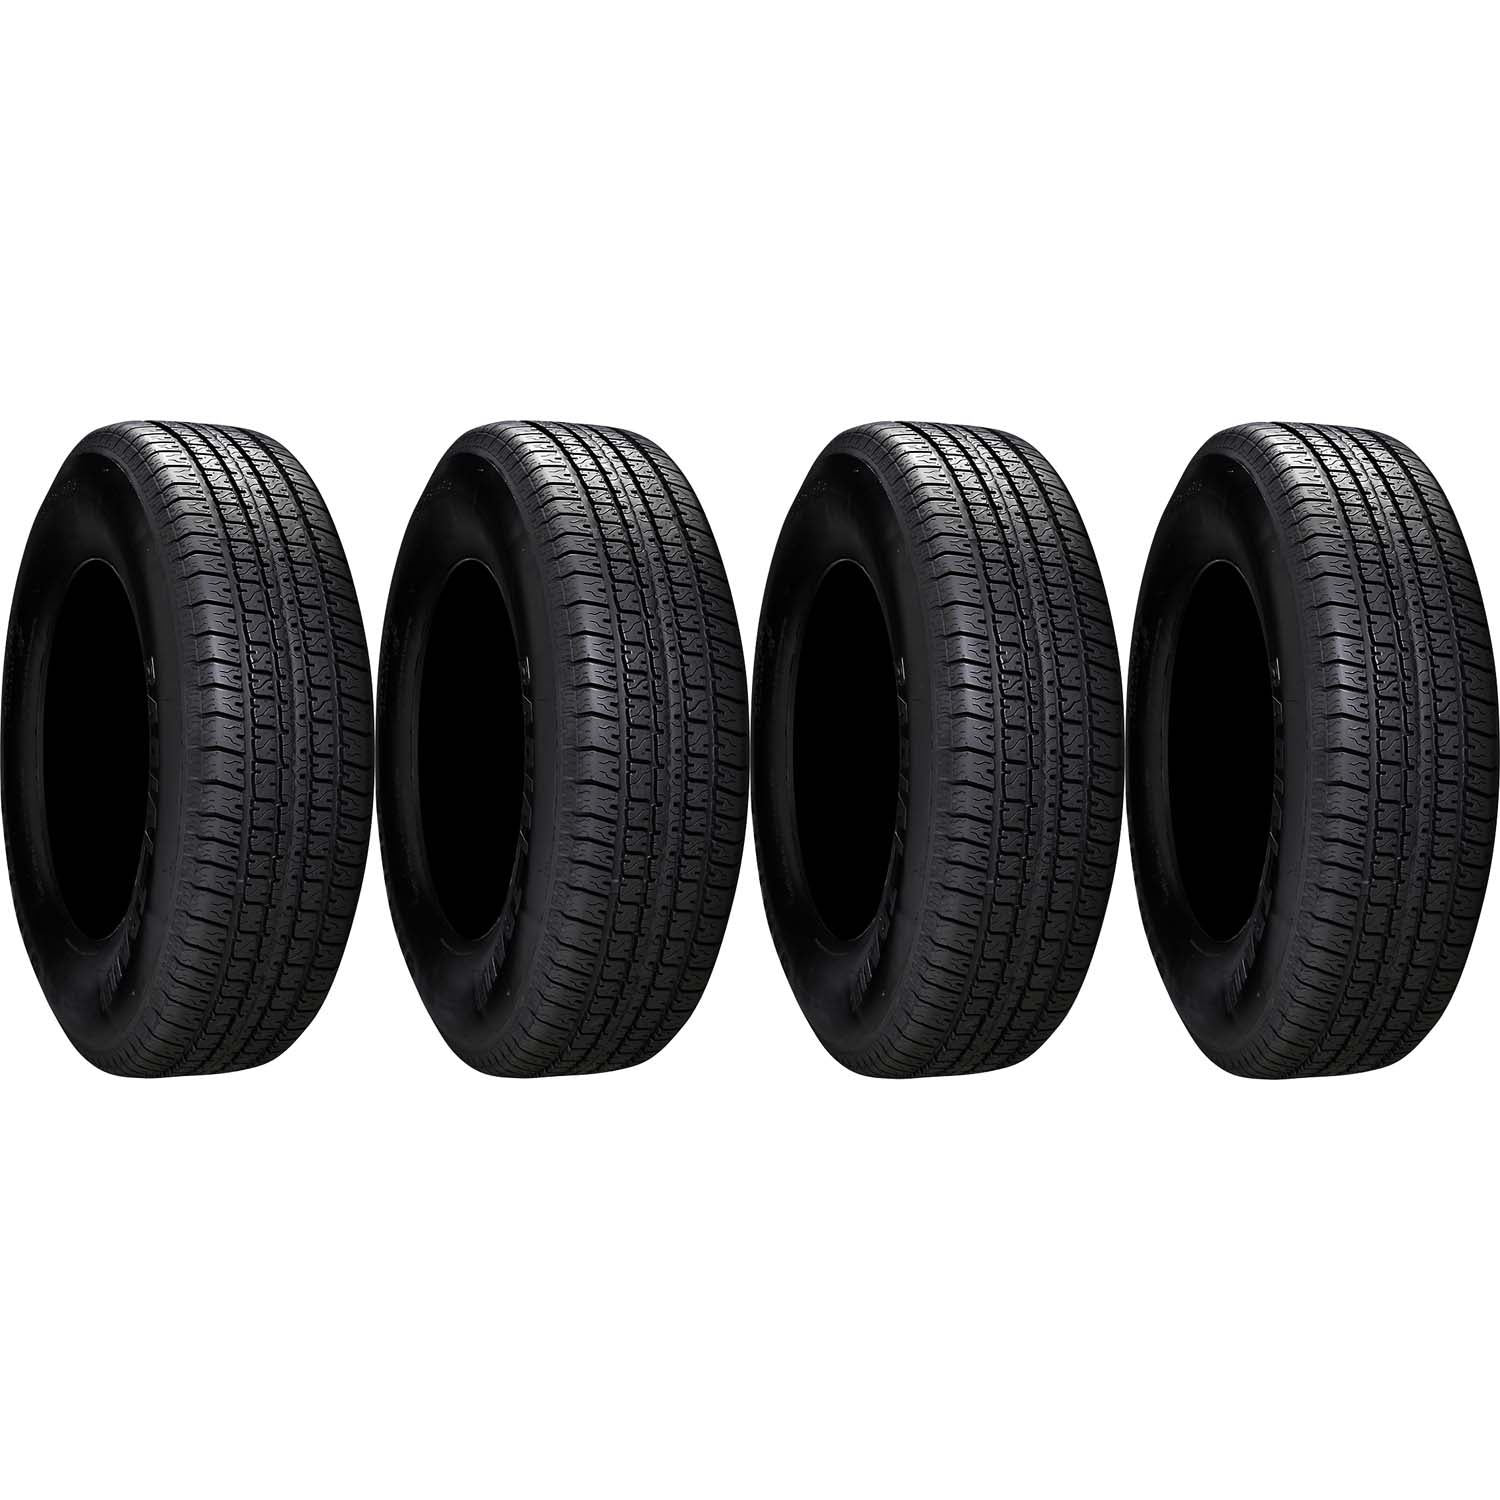 Carlisle Radial Trail RH Trailer Tire LRE 10ply ST145R12 Pack of 4